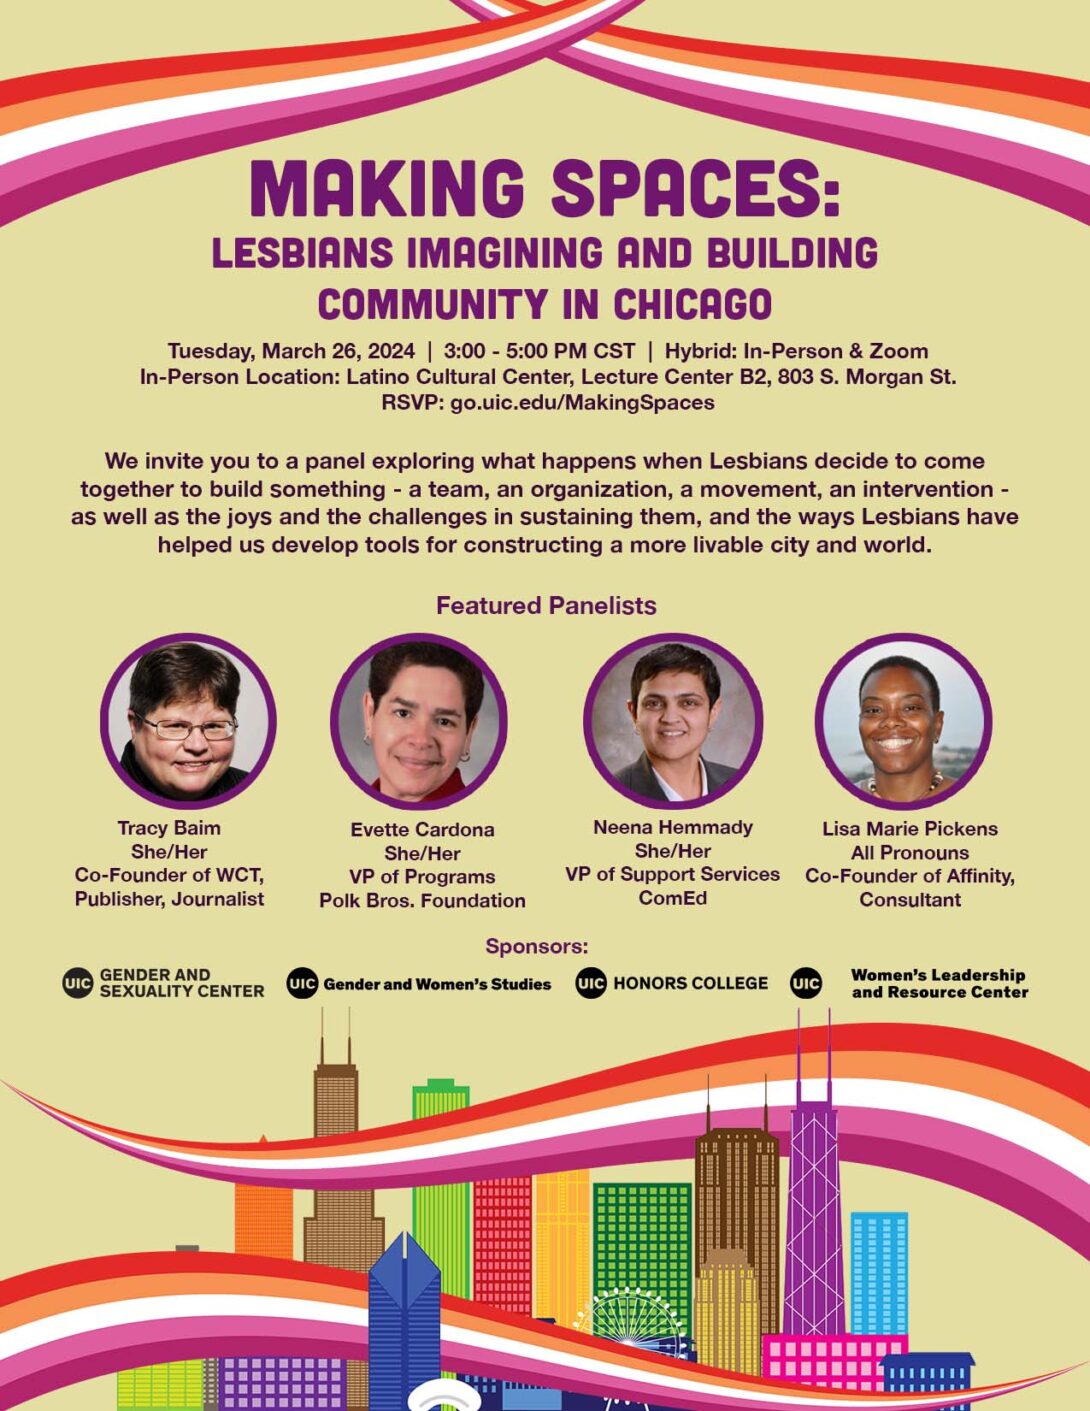 Promotional poster: Purple text on a tan background describing the event (same info on this page). In the center are photos of the featured speakers. At the bottom is the Chicago skyline with buildings in a rainbow of colors. Multicolored swirls are at the top and bottom.